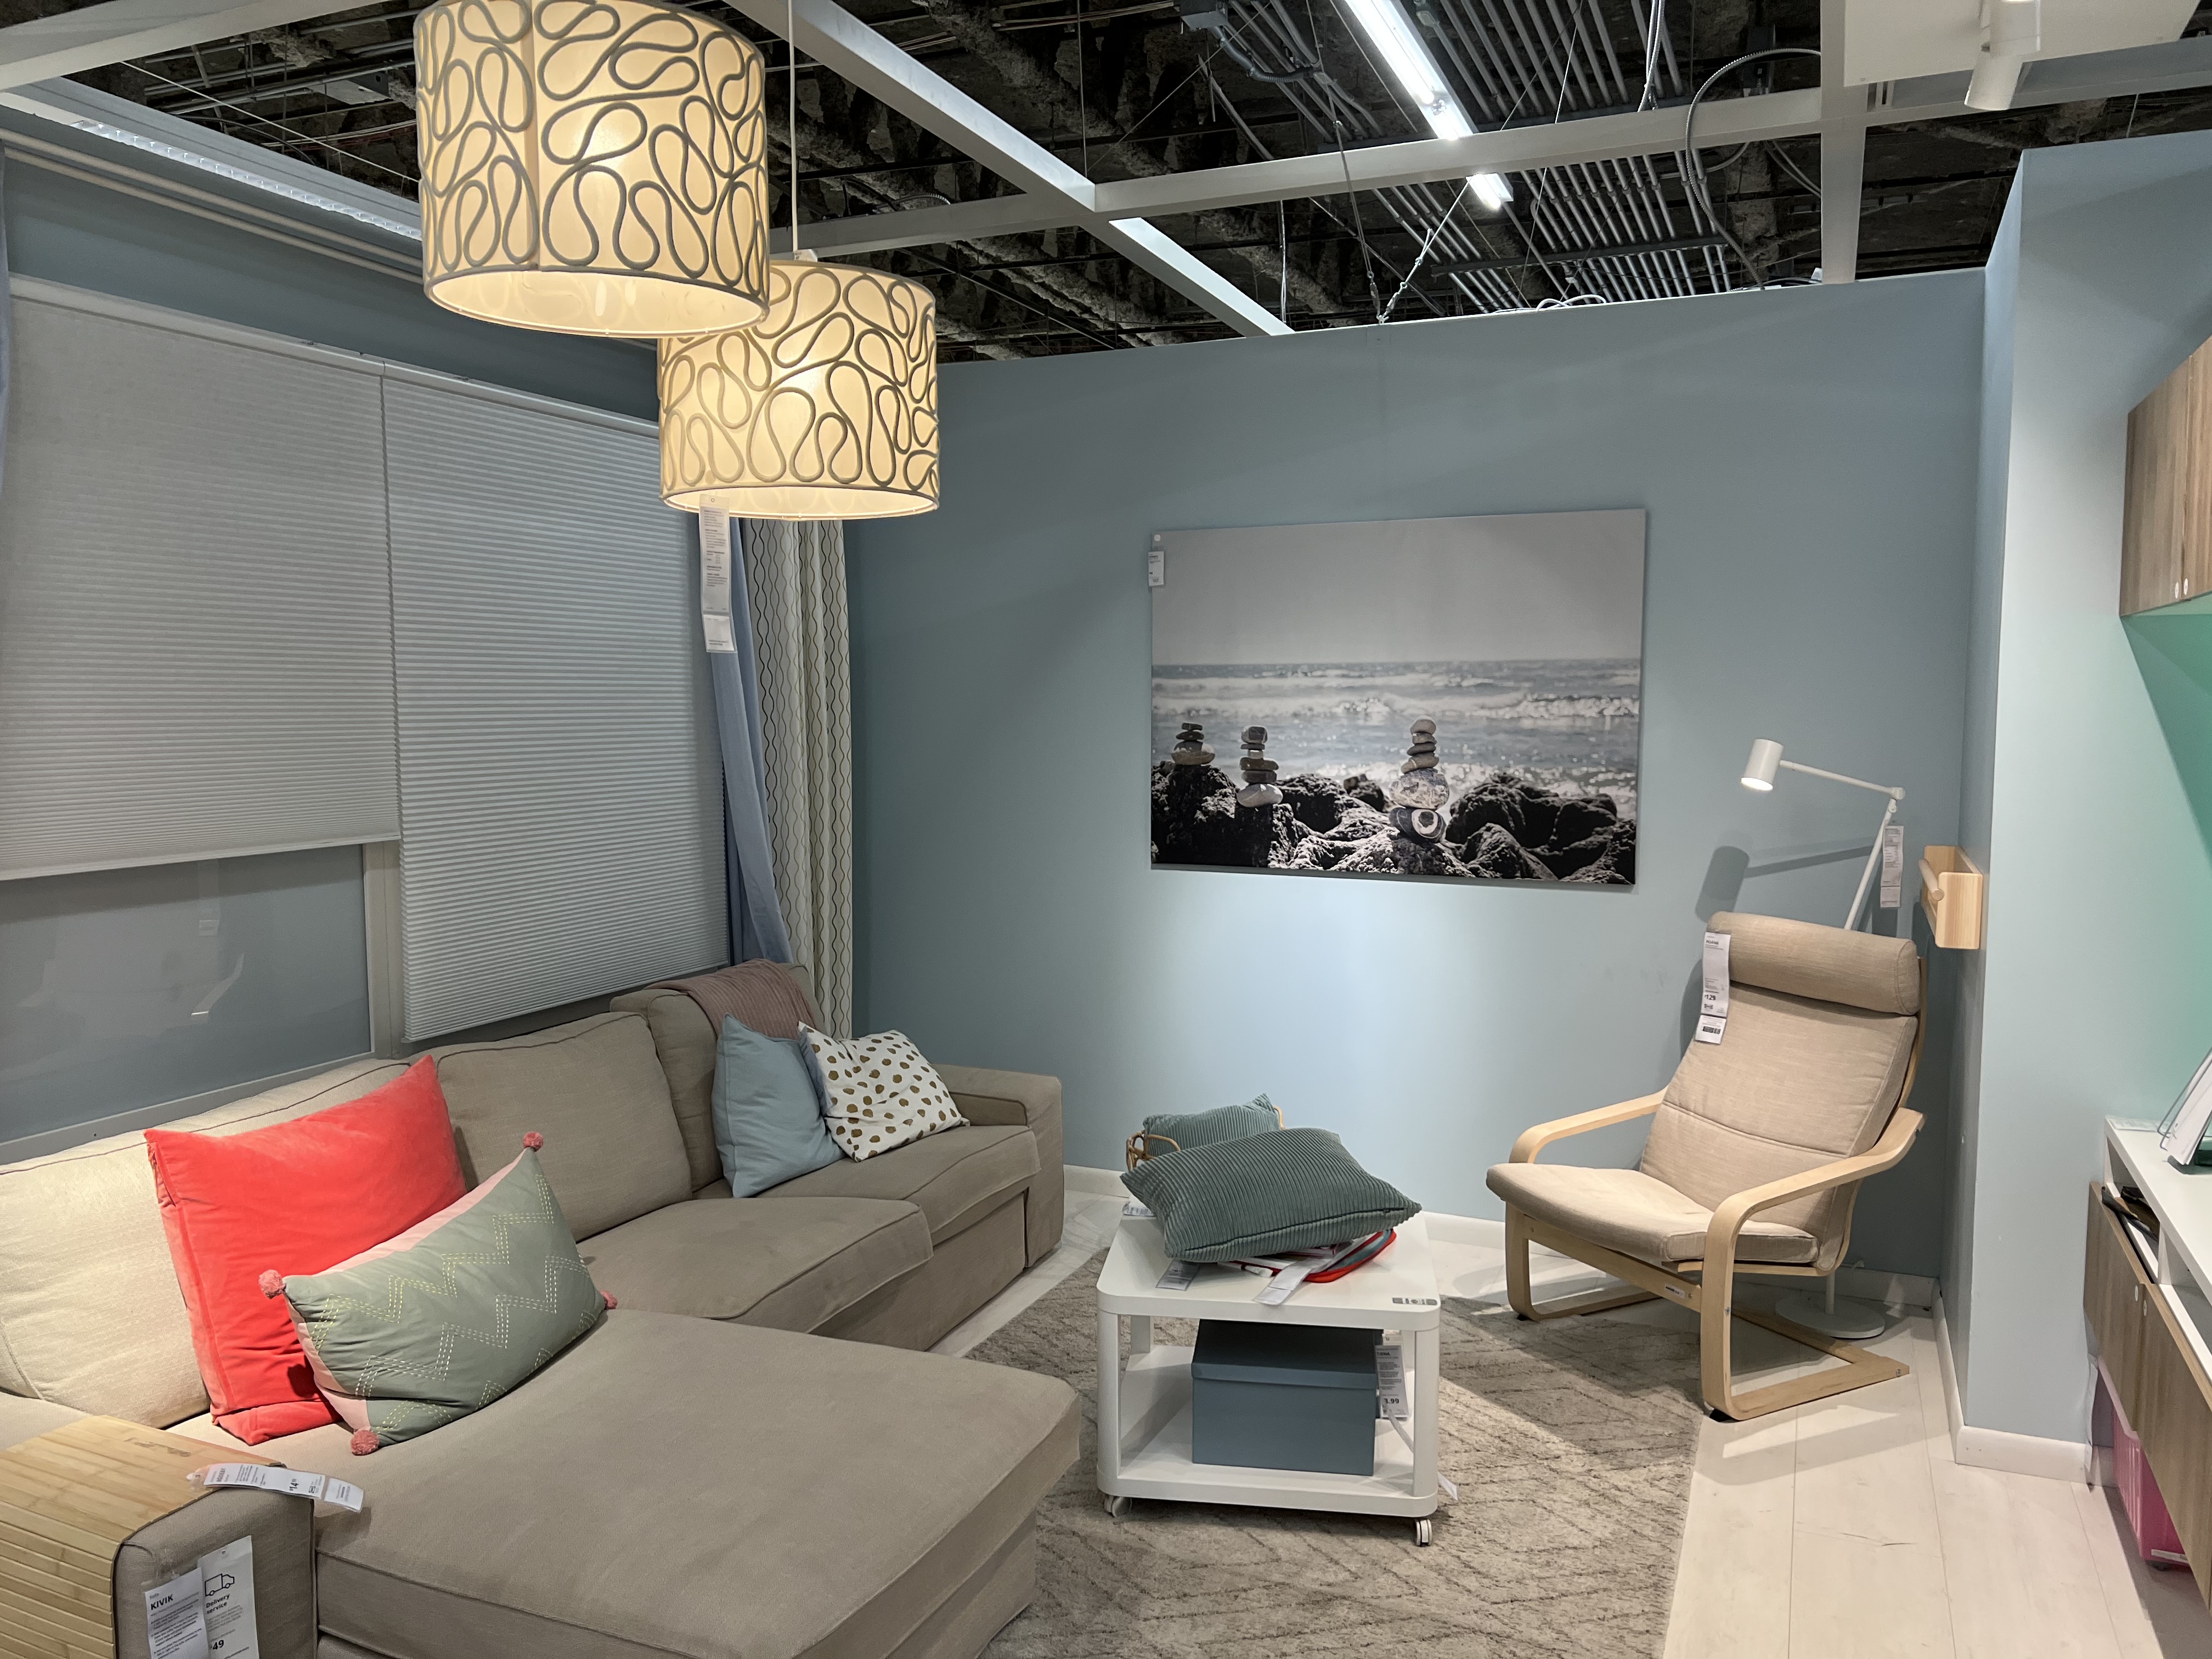 Staged room at IKEA with hanging light fixtures, a couch, chairs, and a painting on the wall